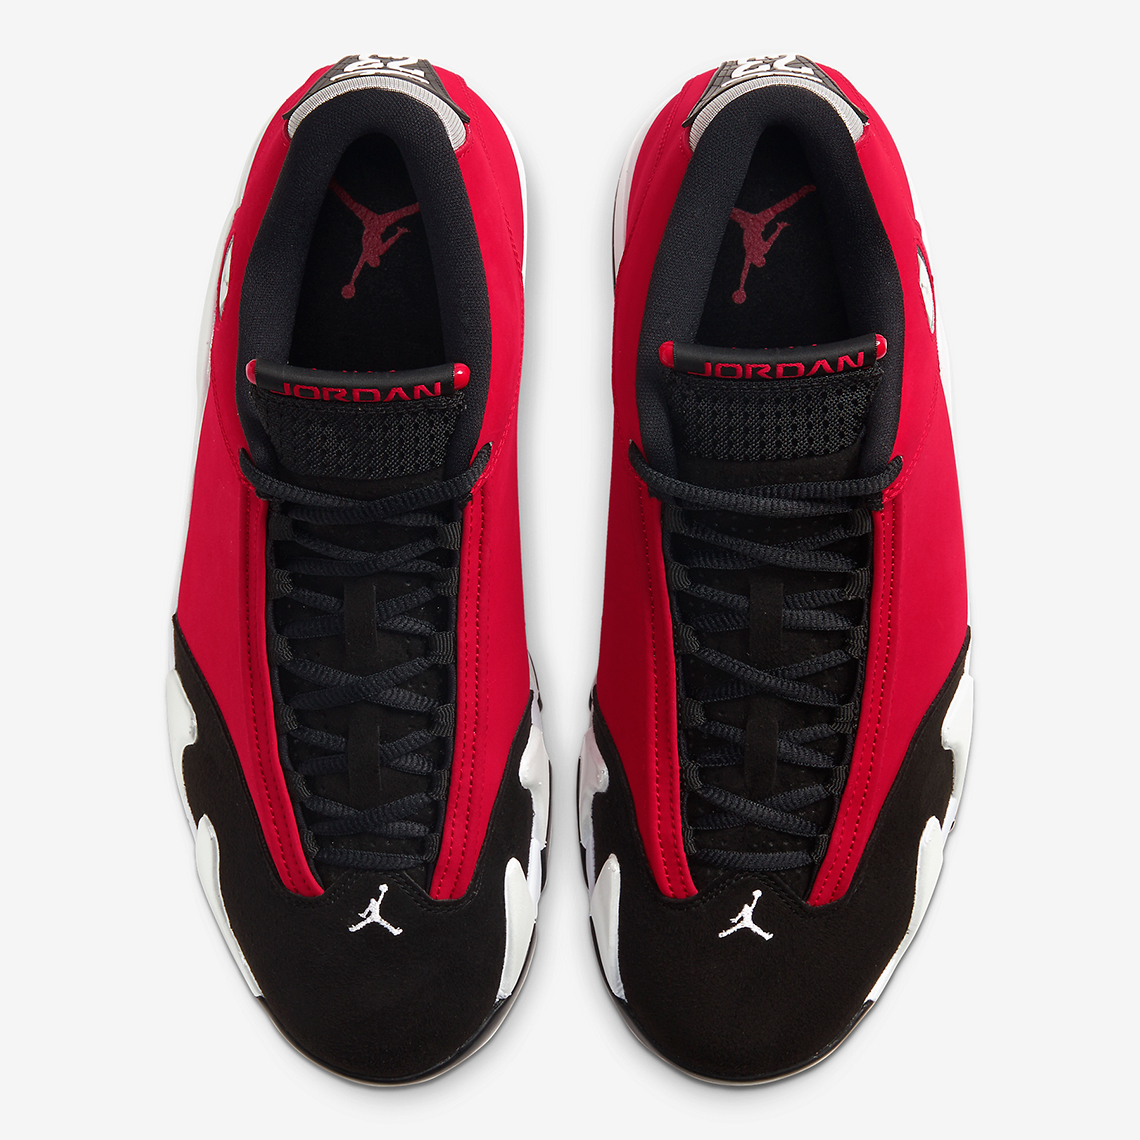 red and white 14s release date